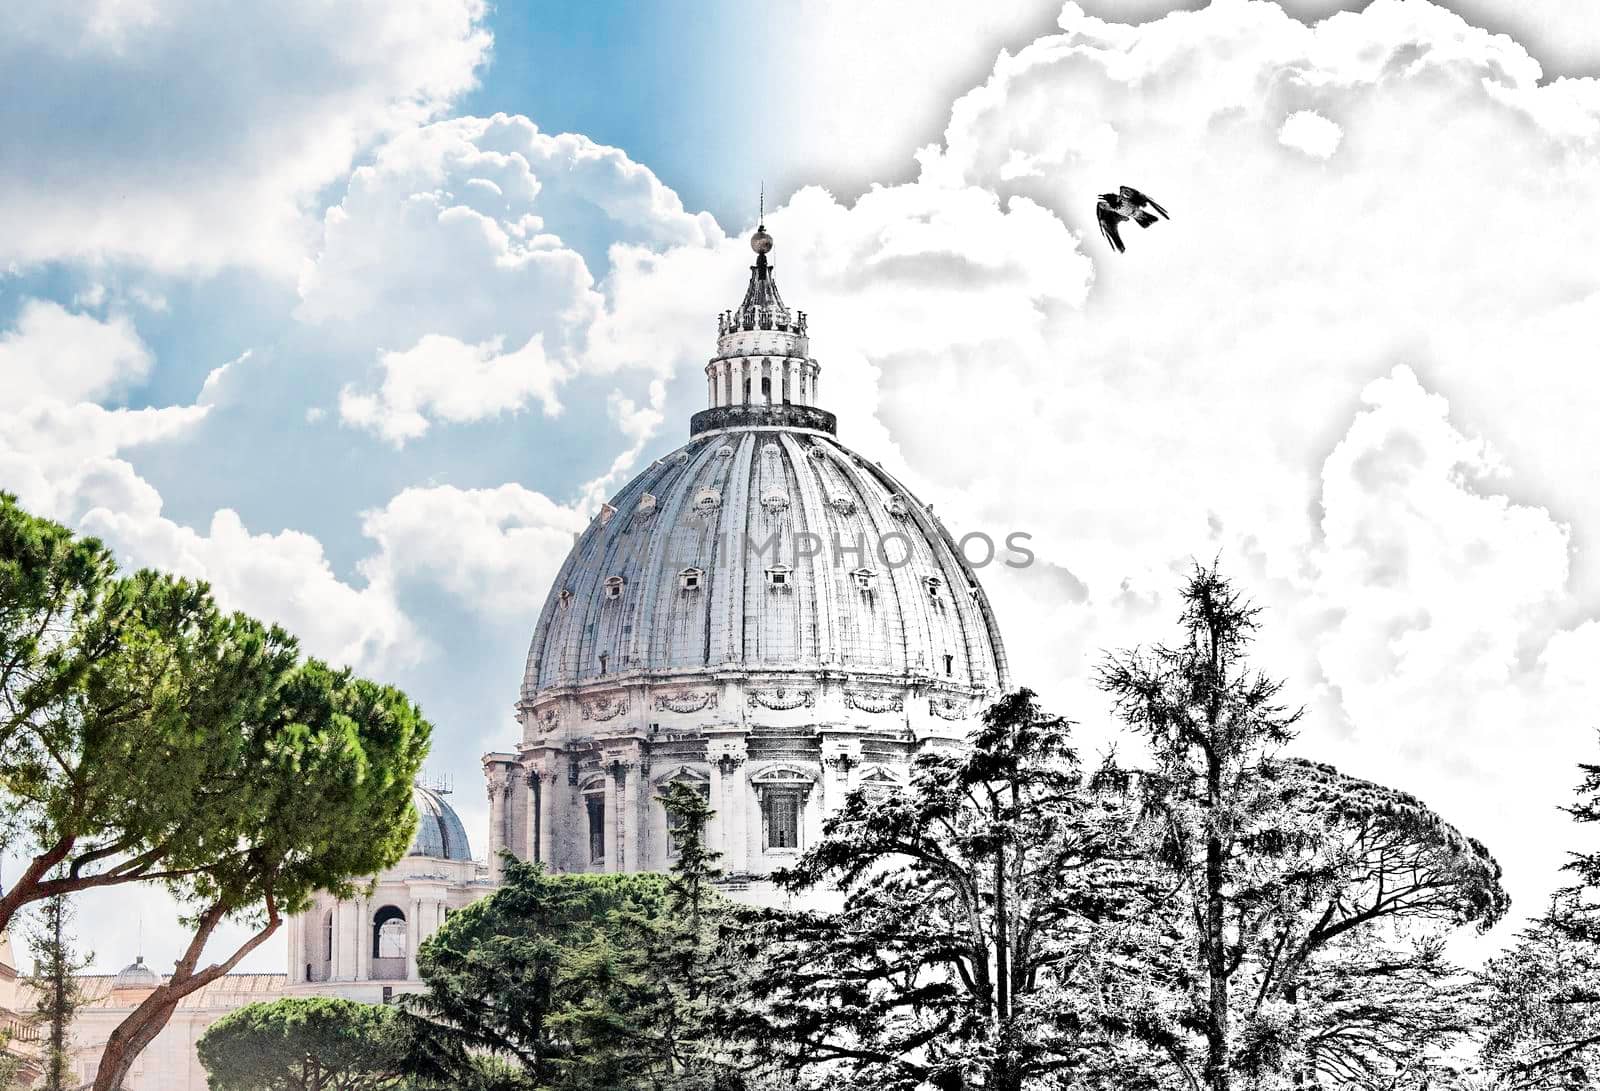 Saint Peter's Basilica  in Vatican in Rome between drawing and reality